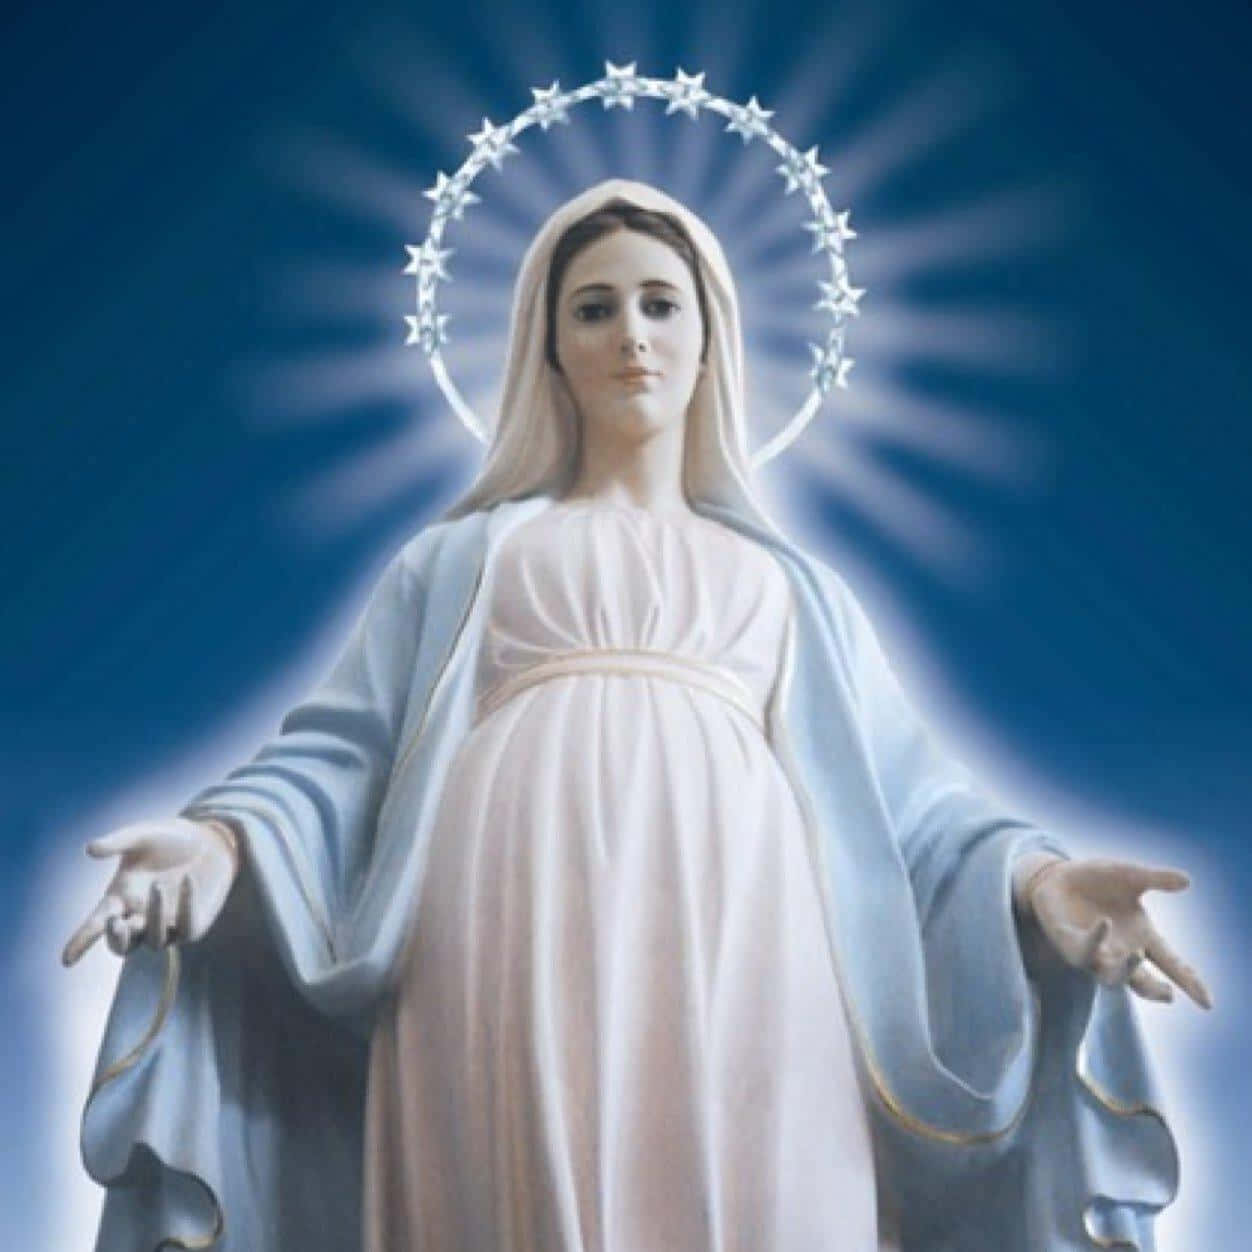 Mother Mary - A Pillar Of Strength